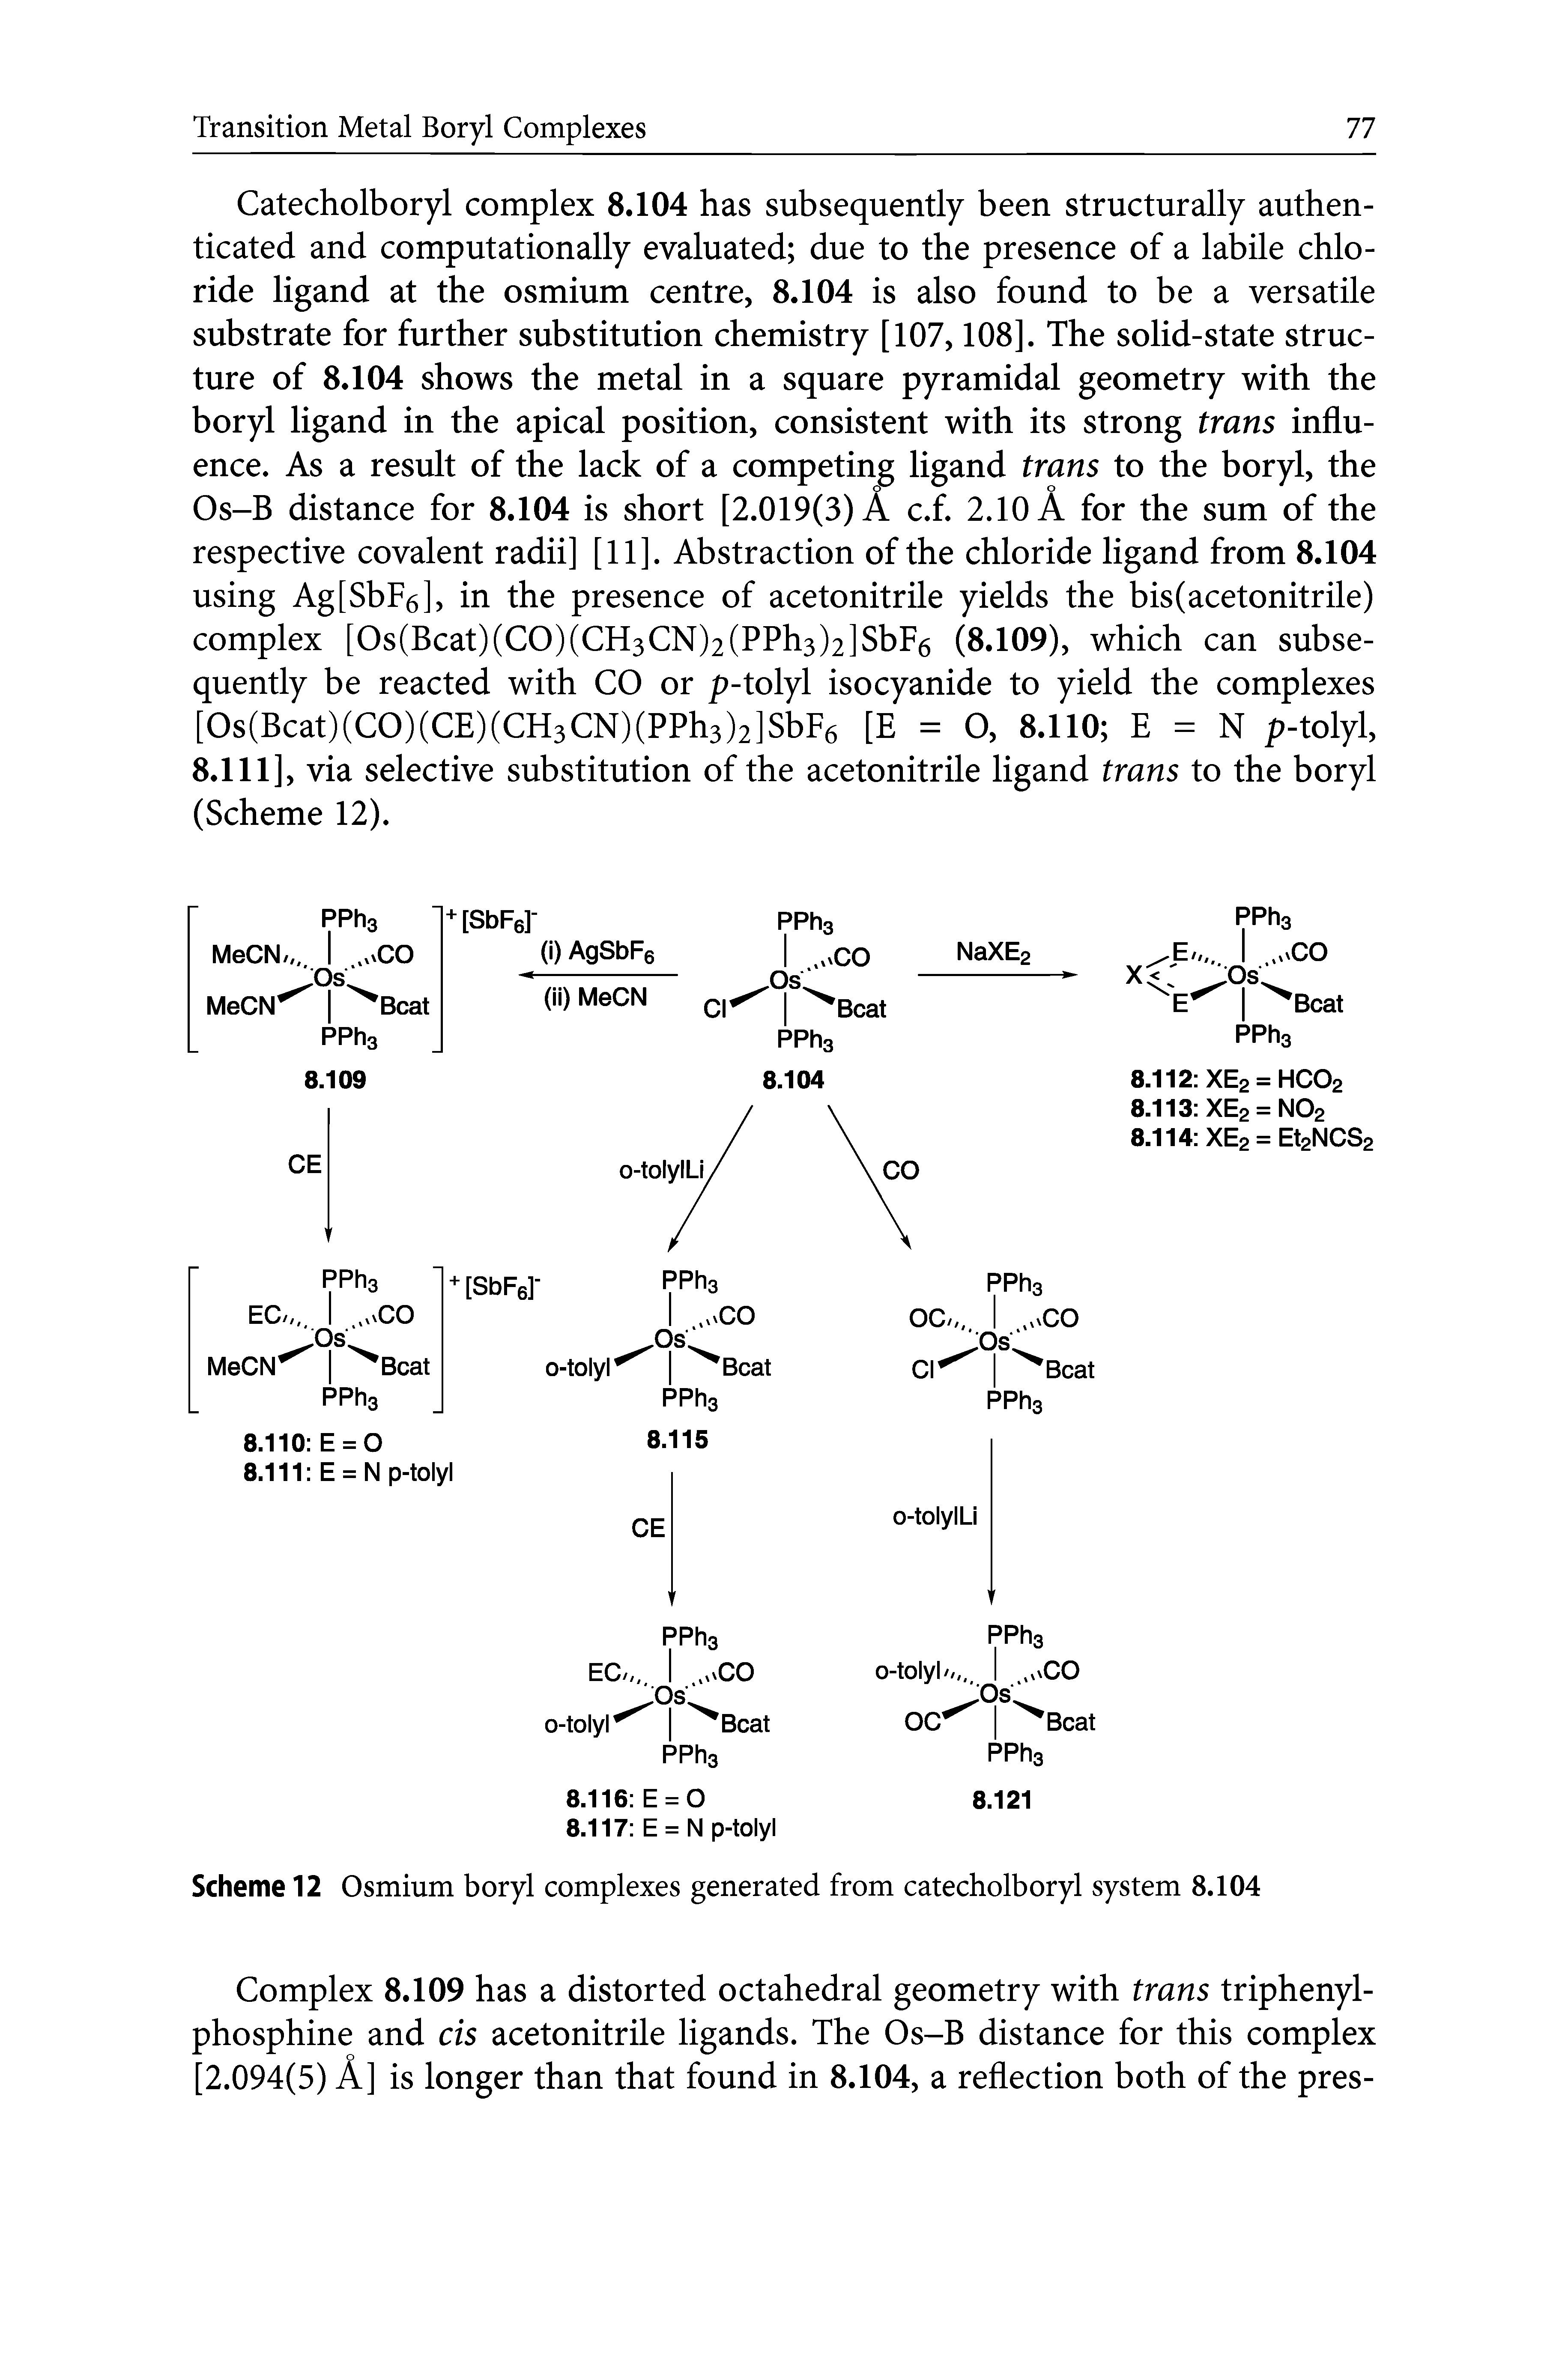 Scheme 12 Osmium boryl complexes generated from catecholboryl system 8.104...